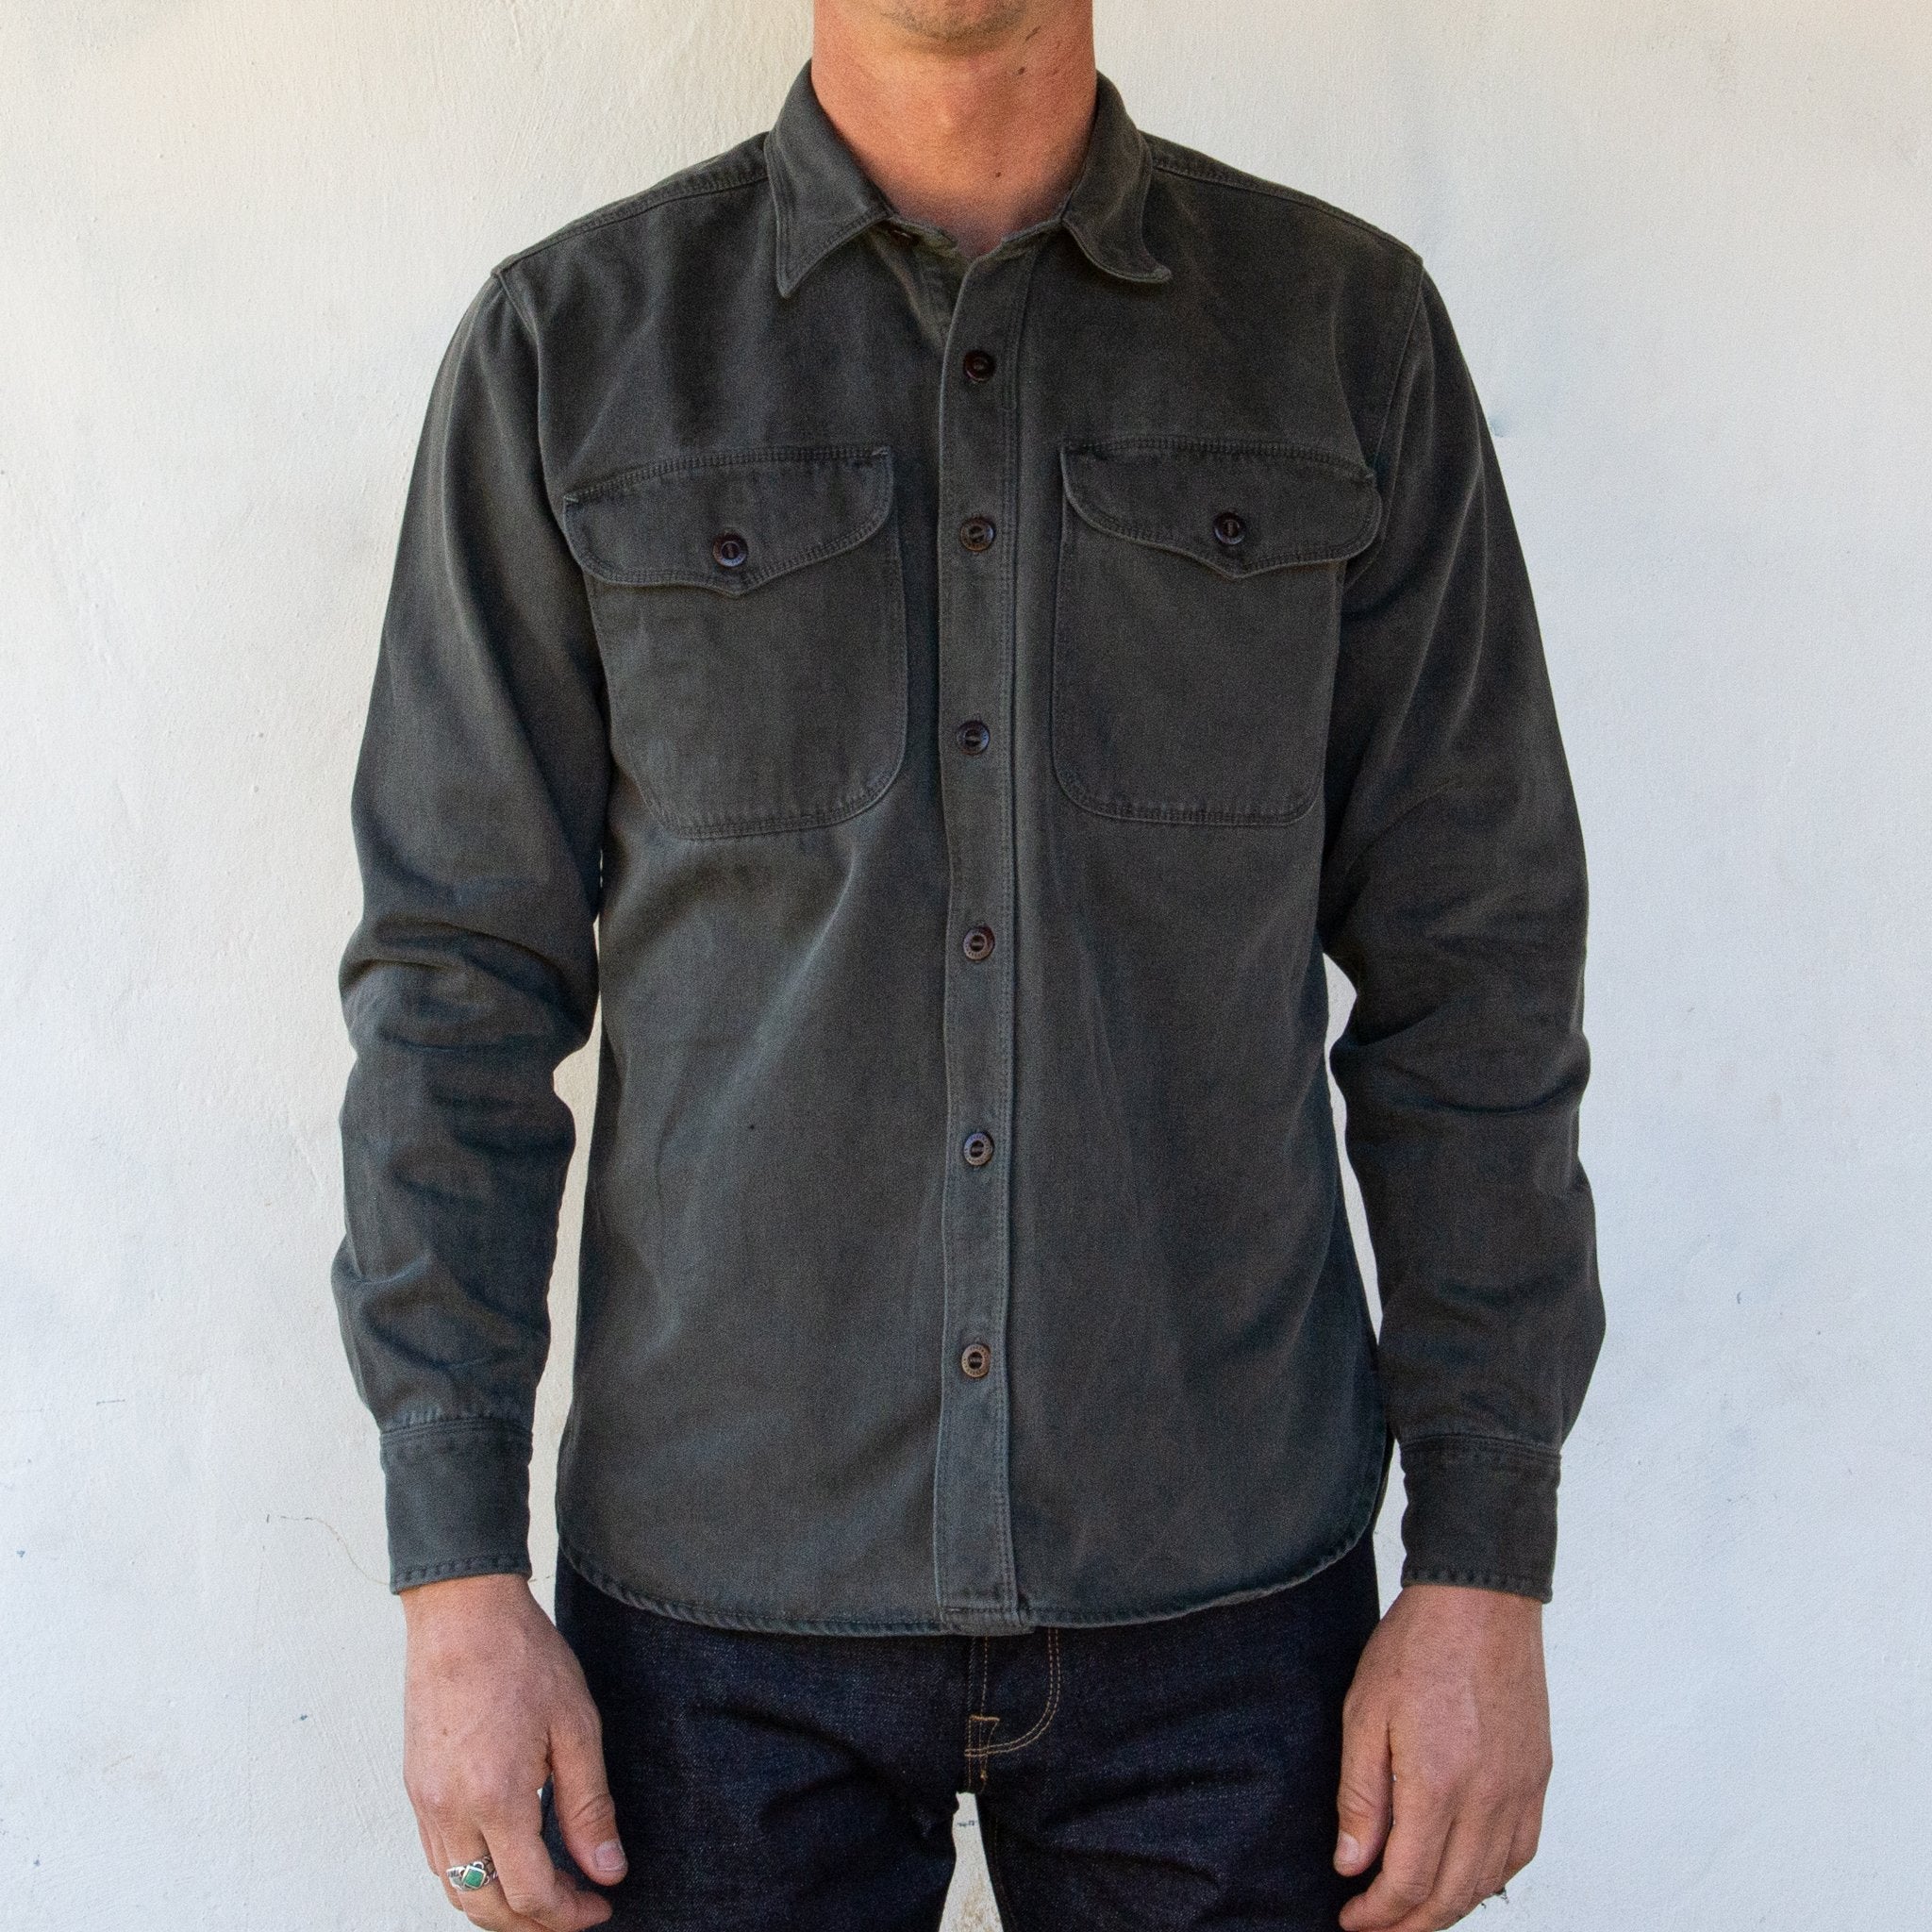 FREENOTE CLOTH // UTILITY SHIRT // LIMITED EDITION CHARCOAL